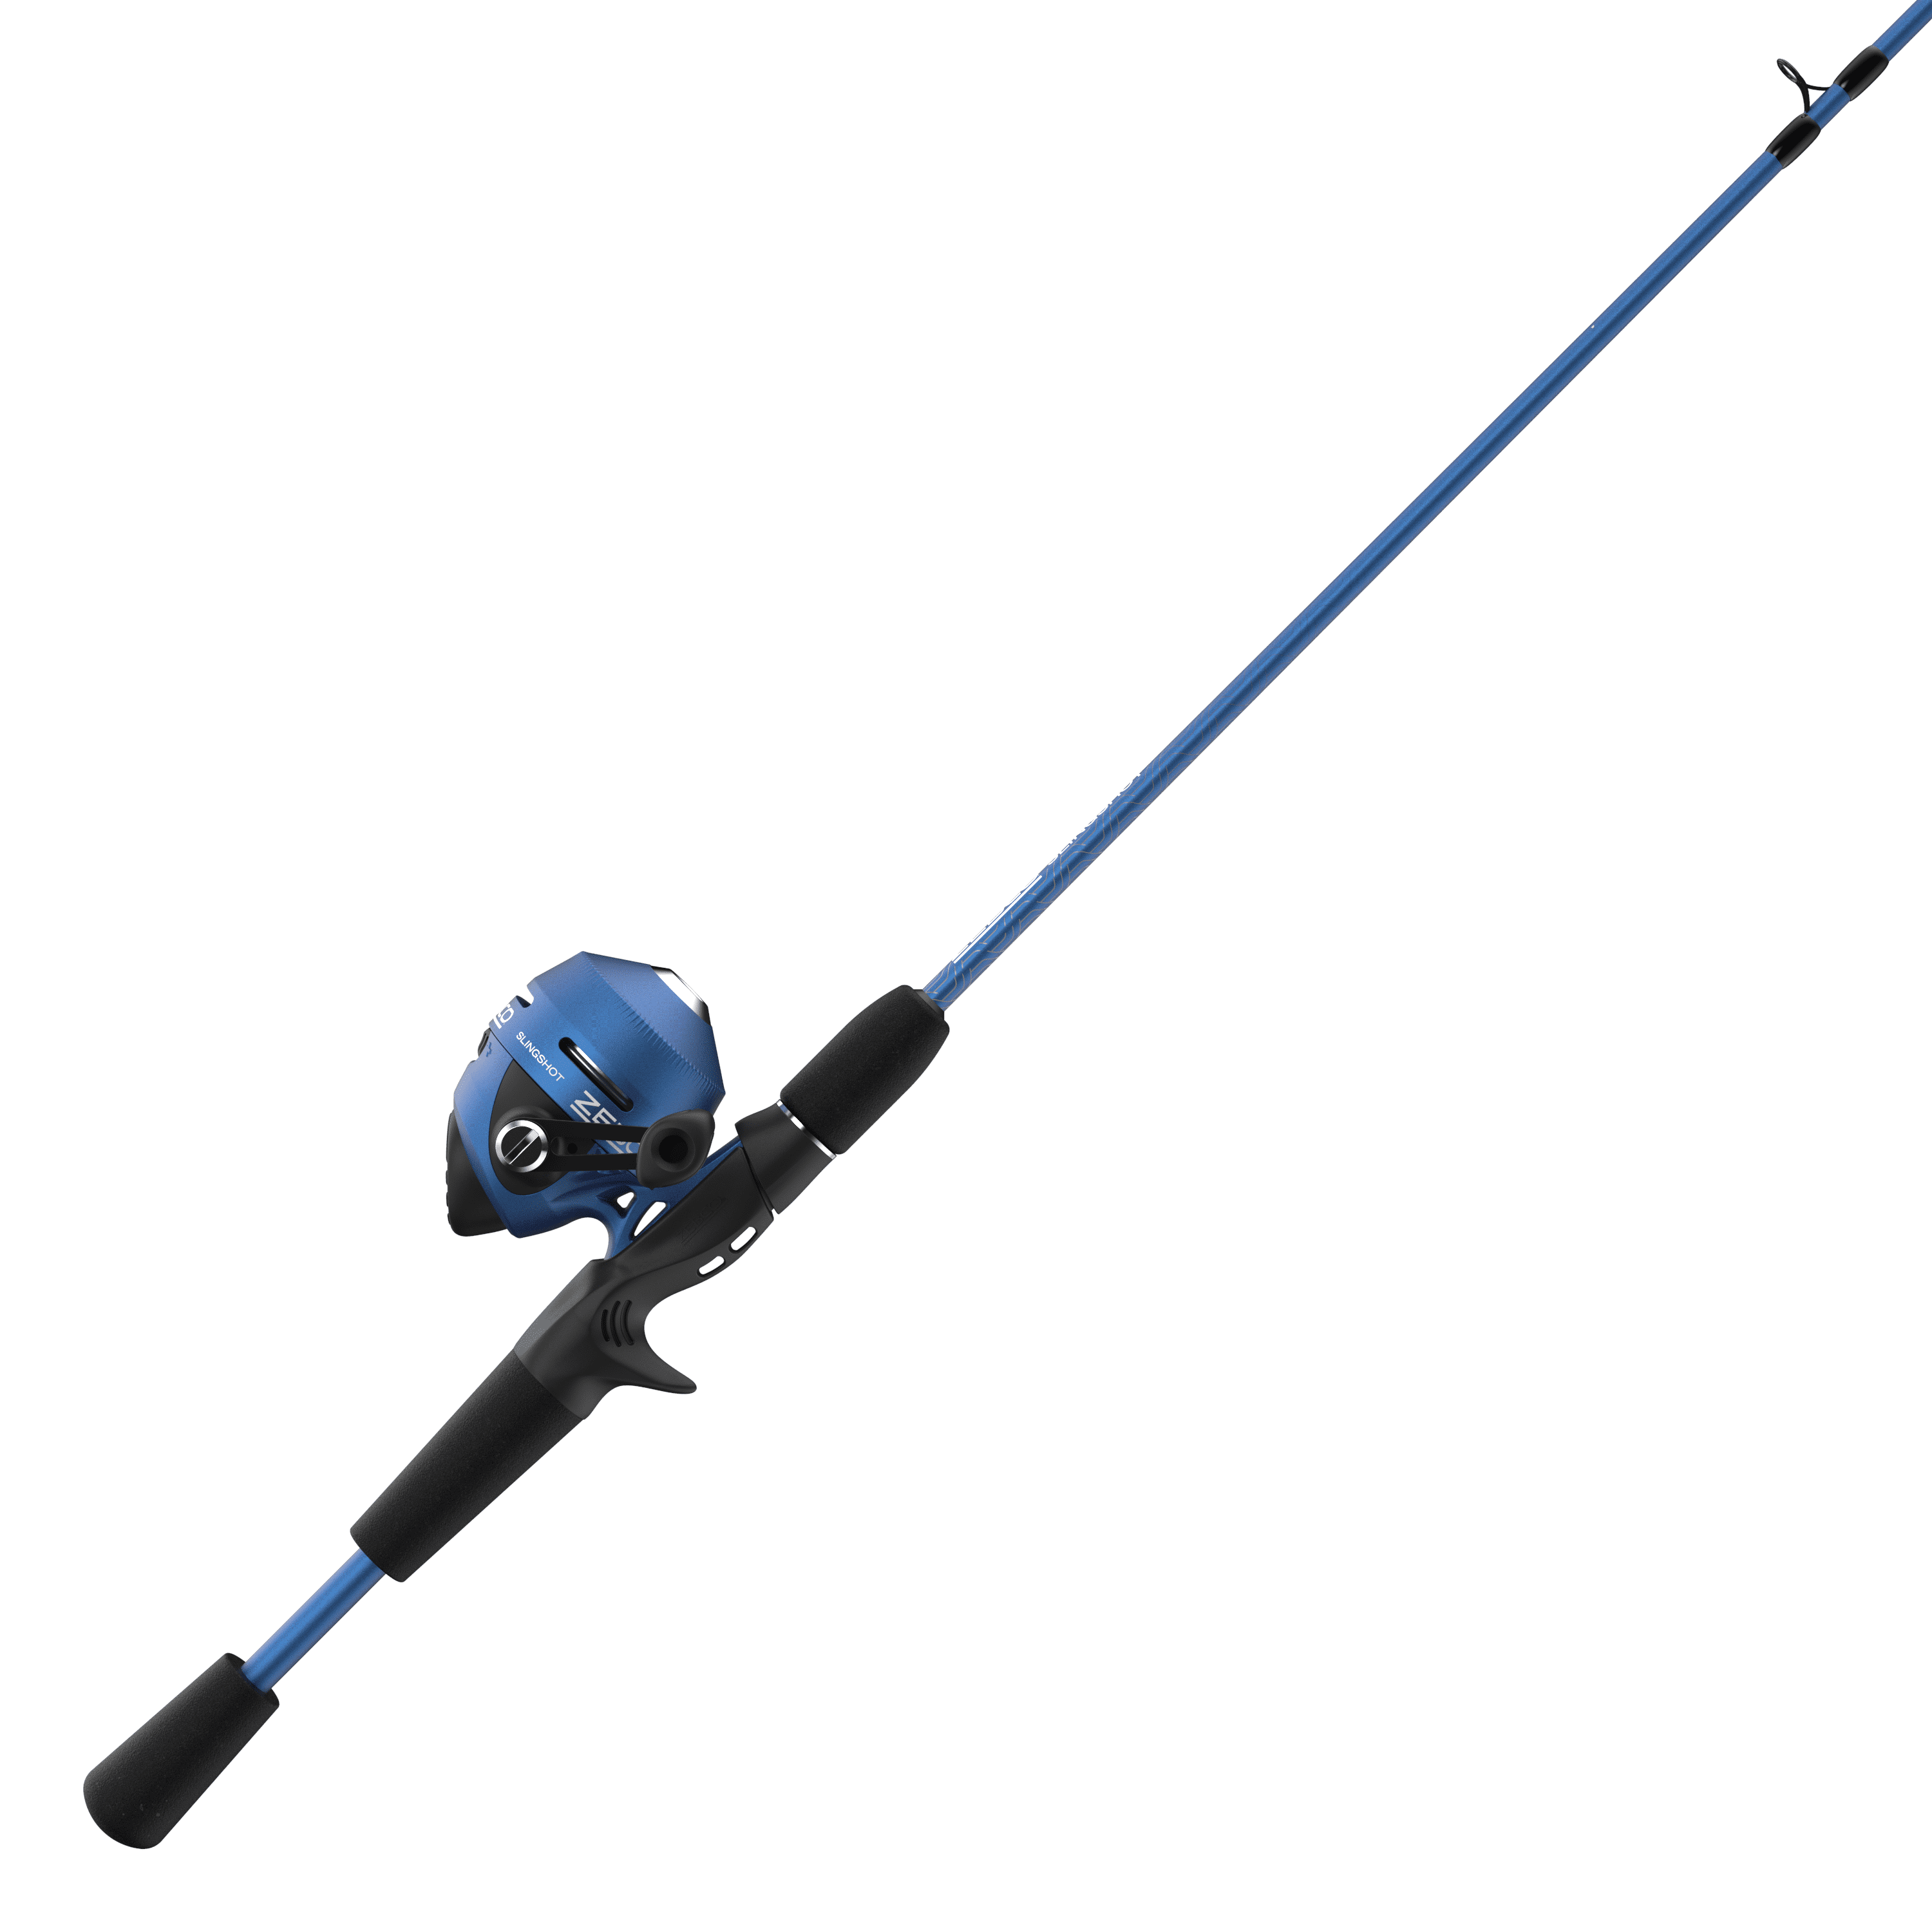 Zebco Slingshot Spincast Reel and Fishing Rod Combo, 5-Foot 6-Inch